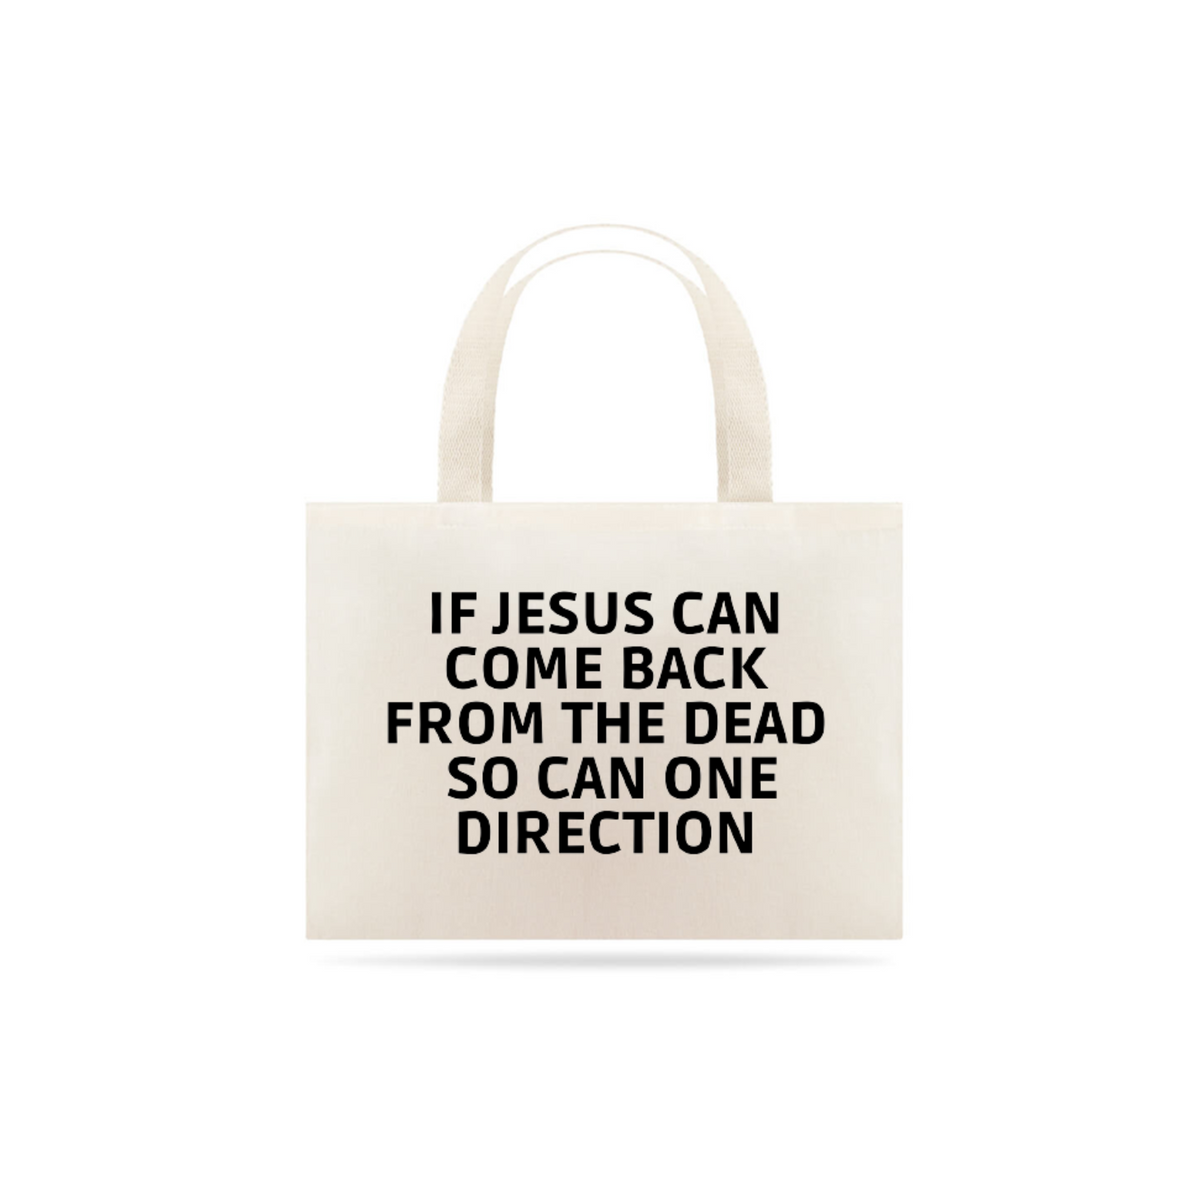 Nome do produtoEcobag if jesus can come back from the dead so can one direction